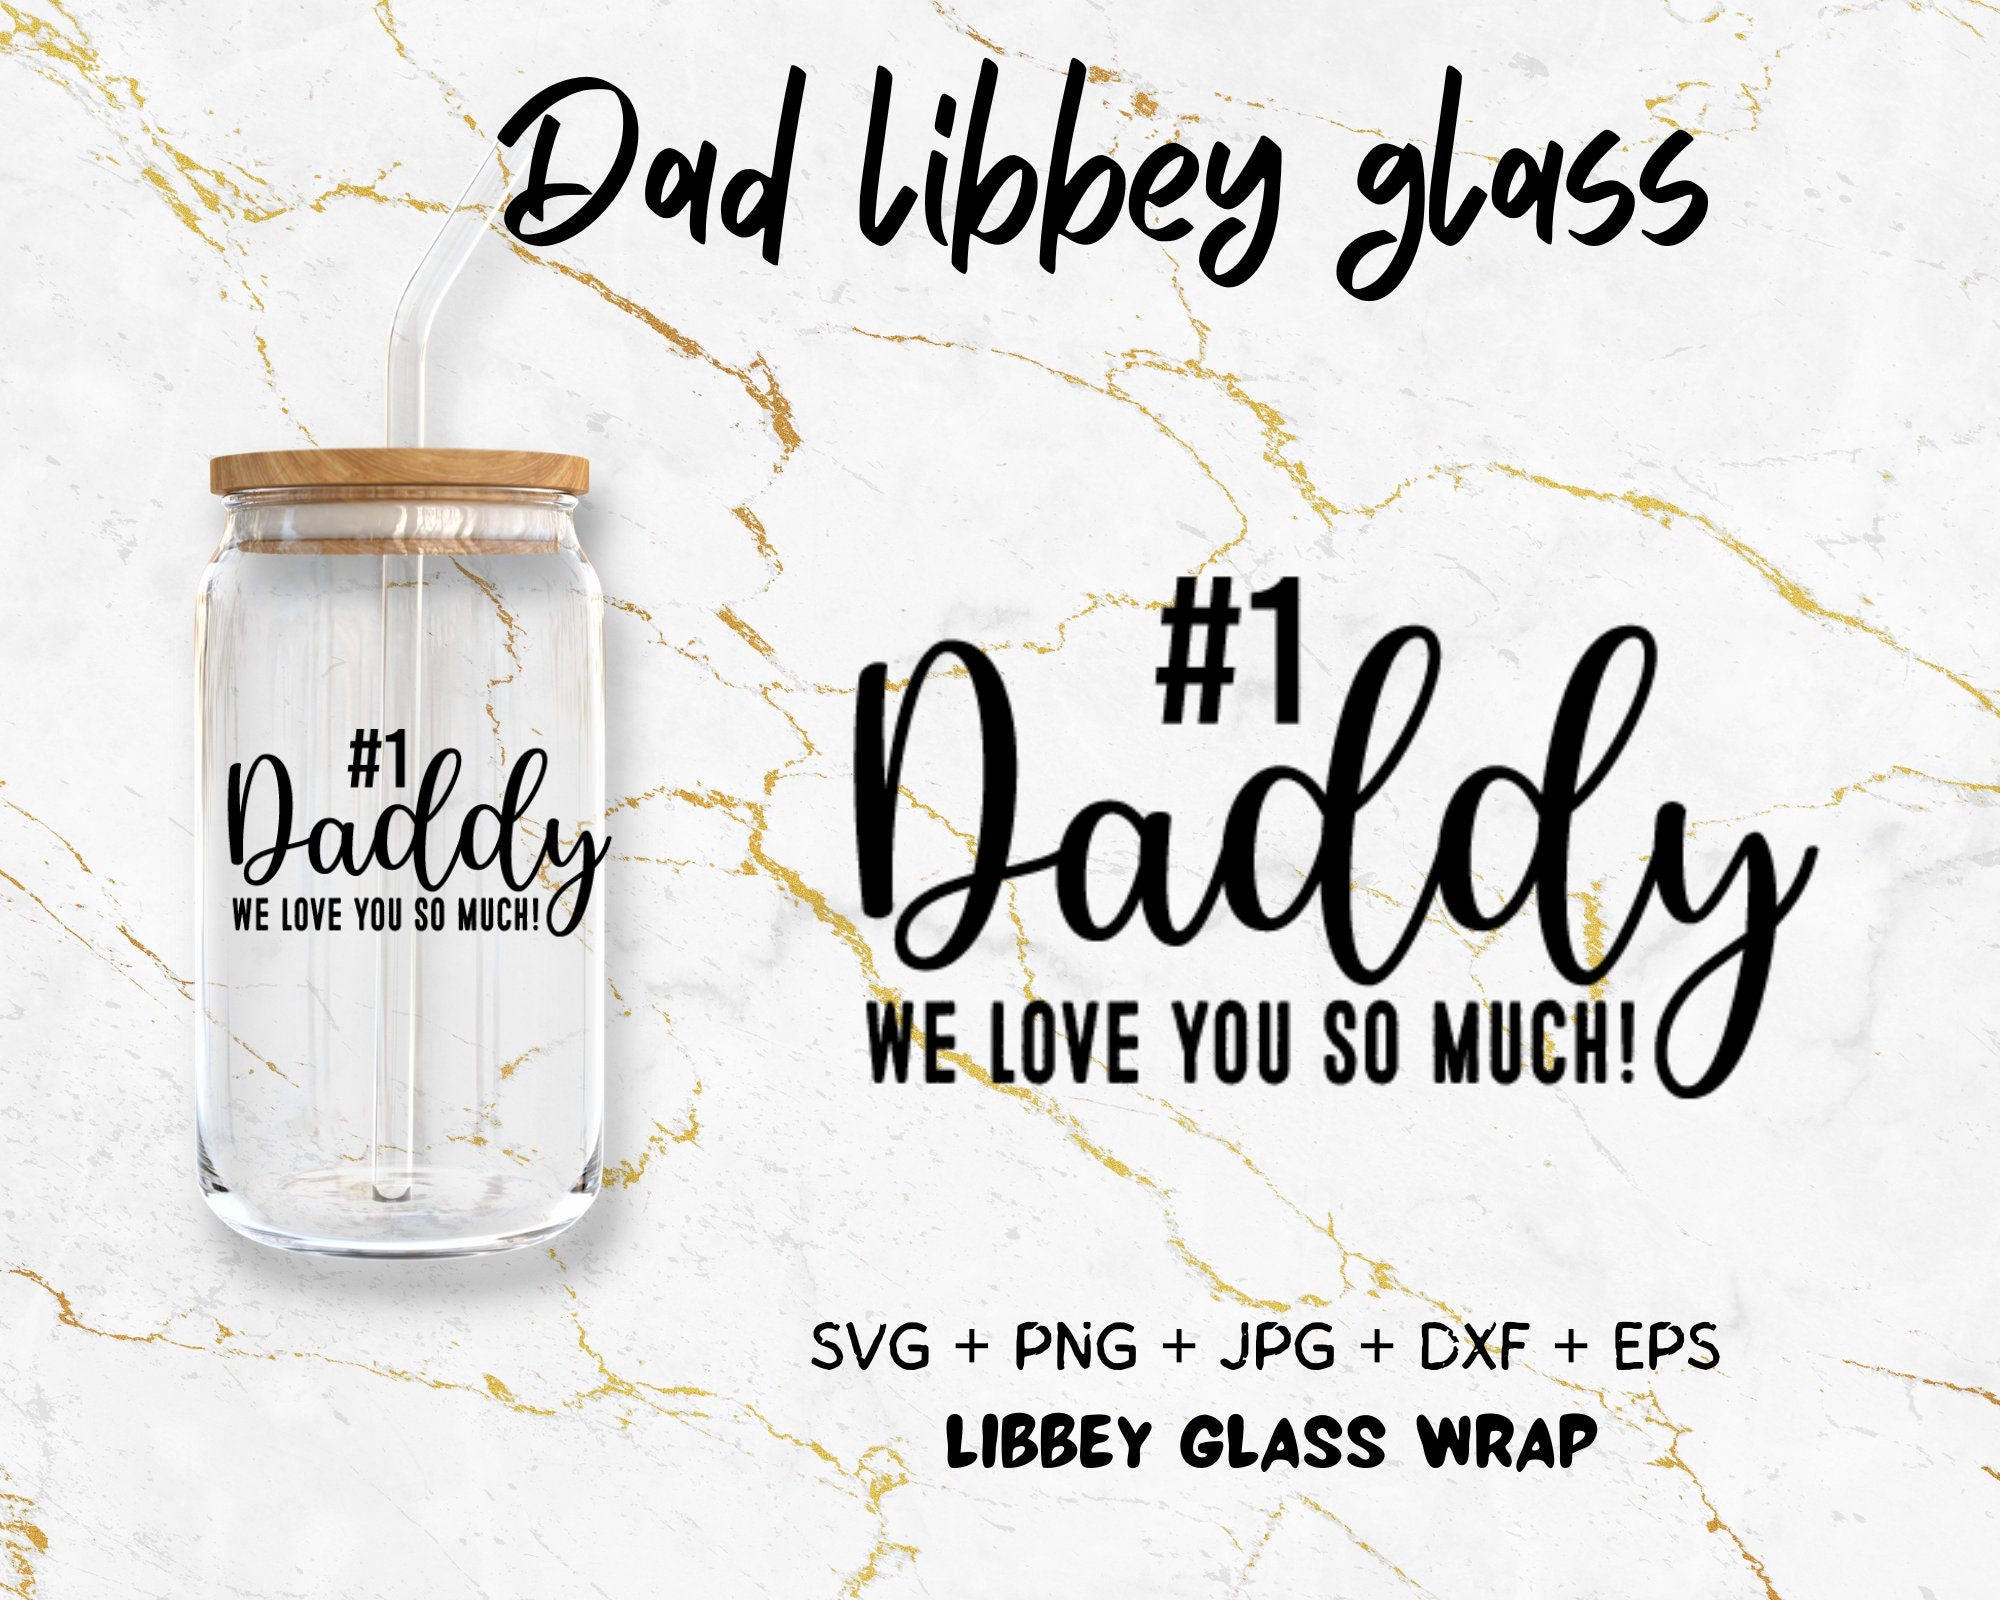 Daddy we love you so much Libbey glass wrap svg,  Father